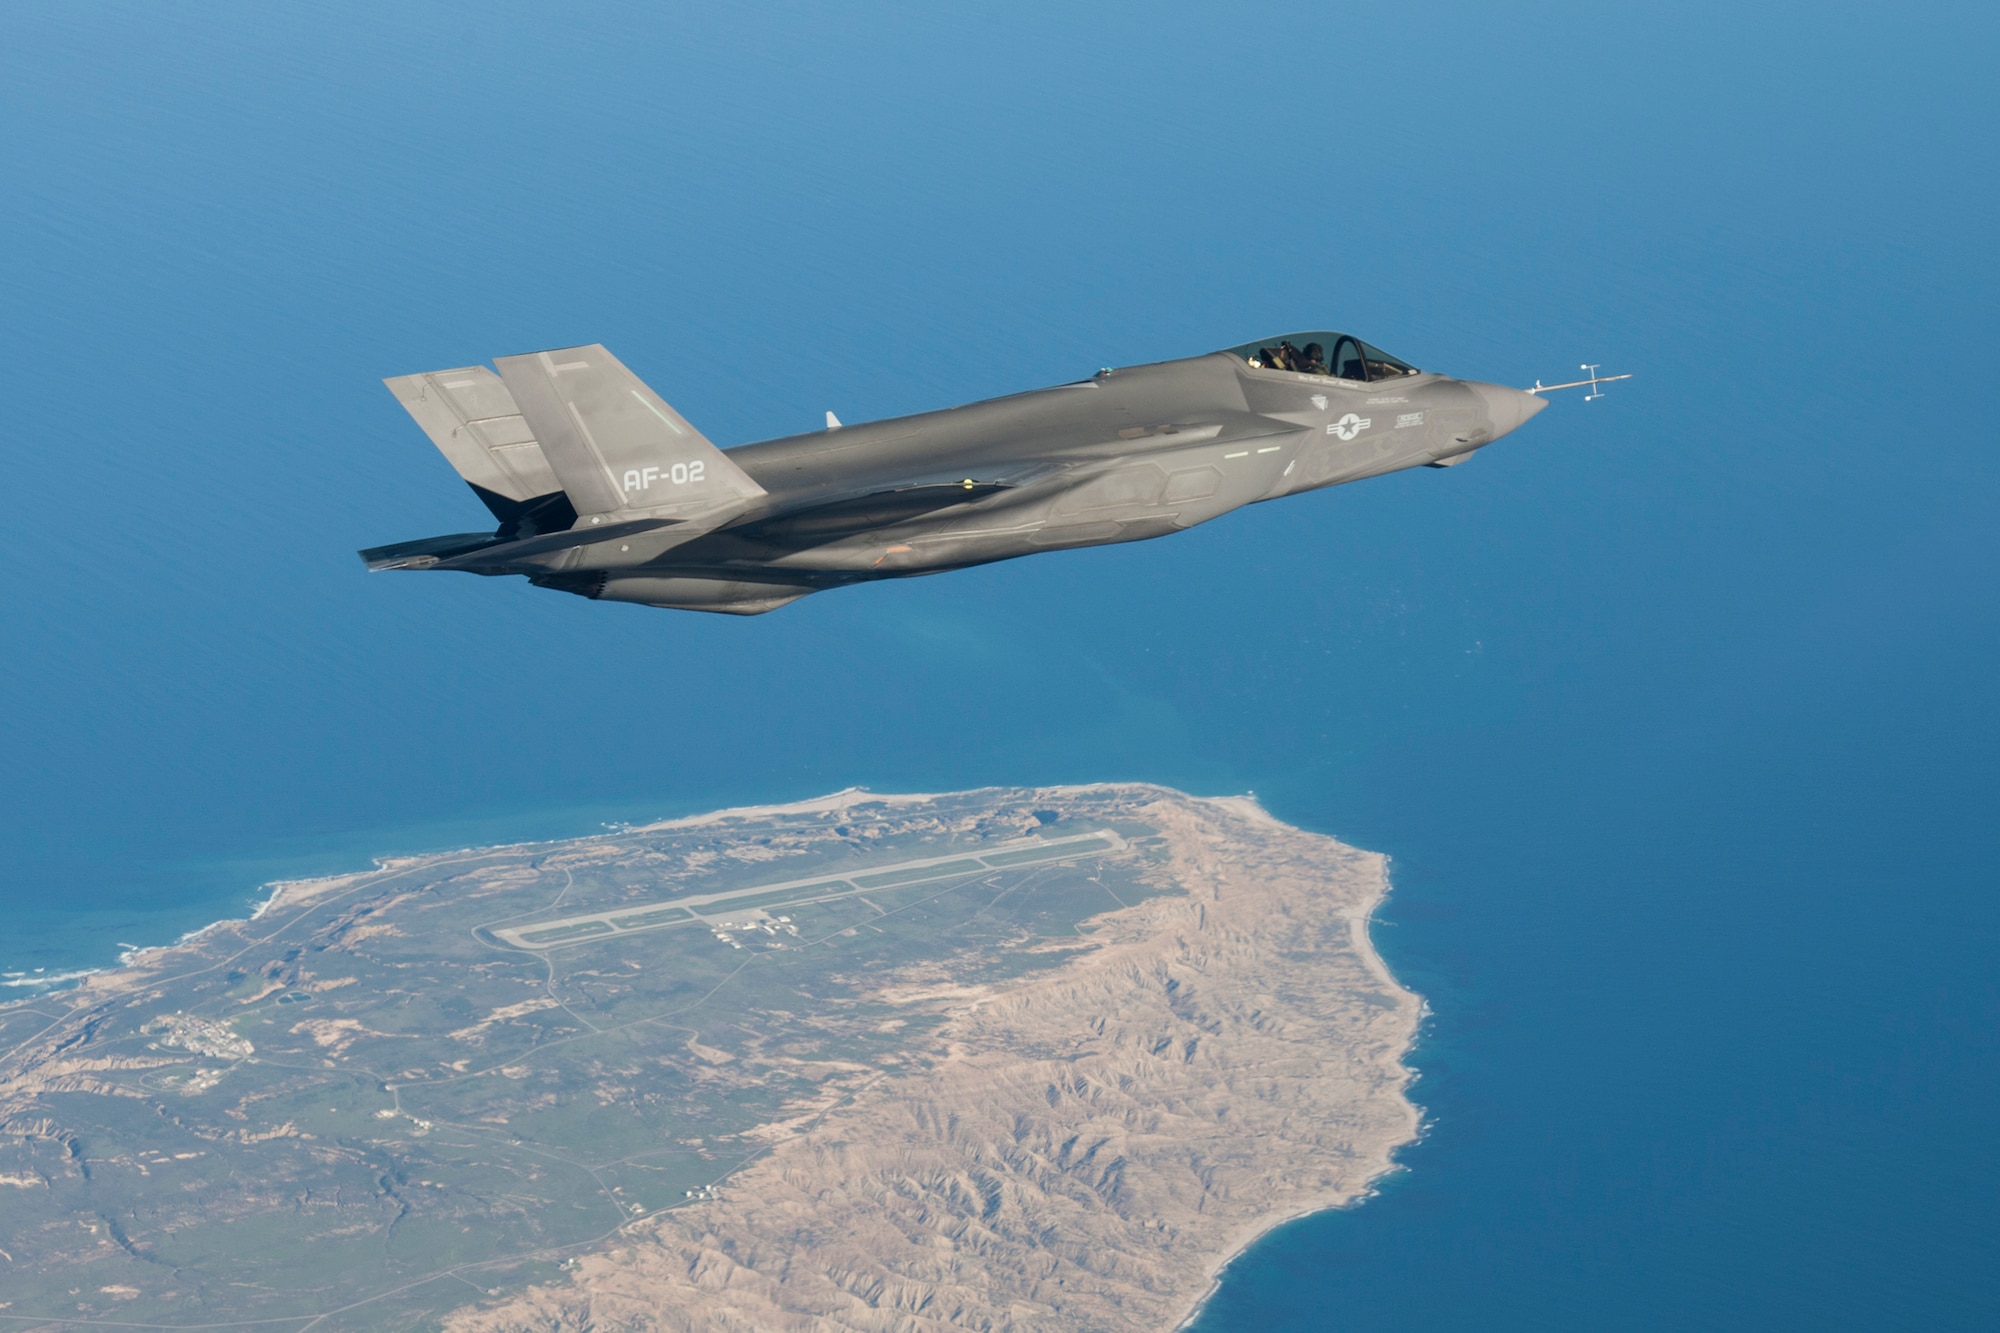 The F-35 Lightning II is one of many airframes that conducts testing off the coast of southern California, as well as at Edwards and other ranges located in the southwest United States. (U.S. Air Force Photo by Paul Weatherman/Lockheed Martin)